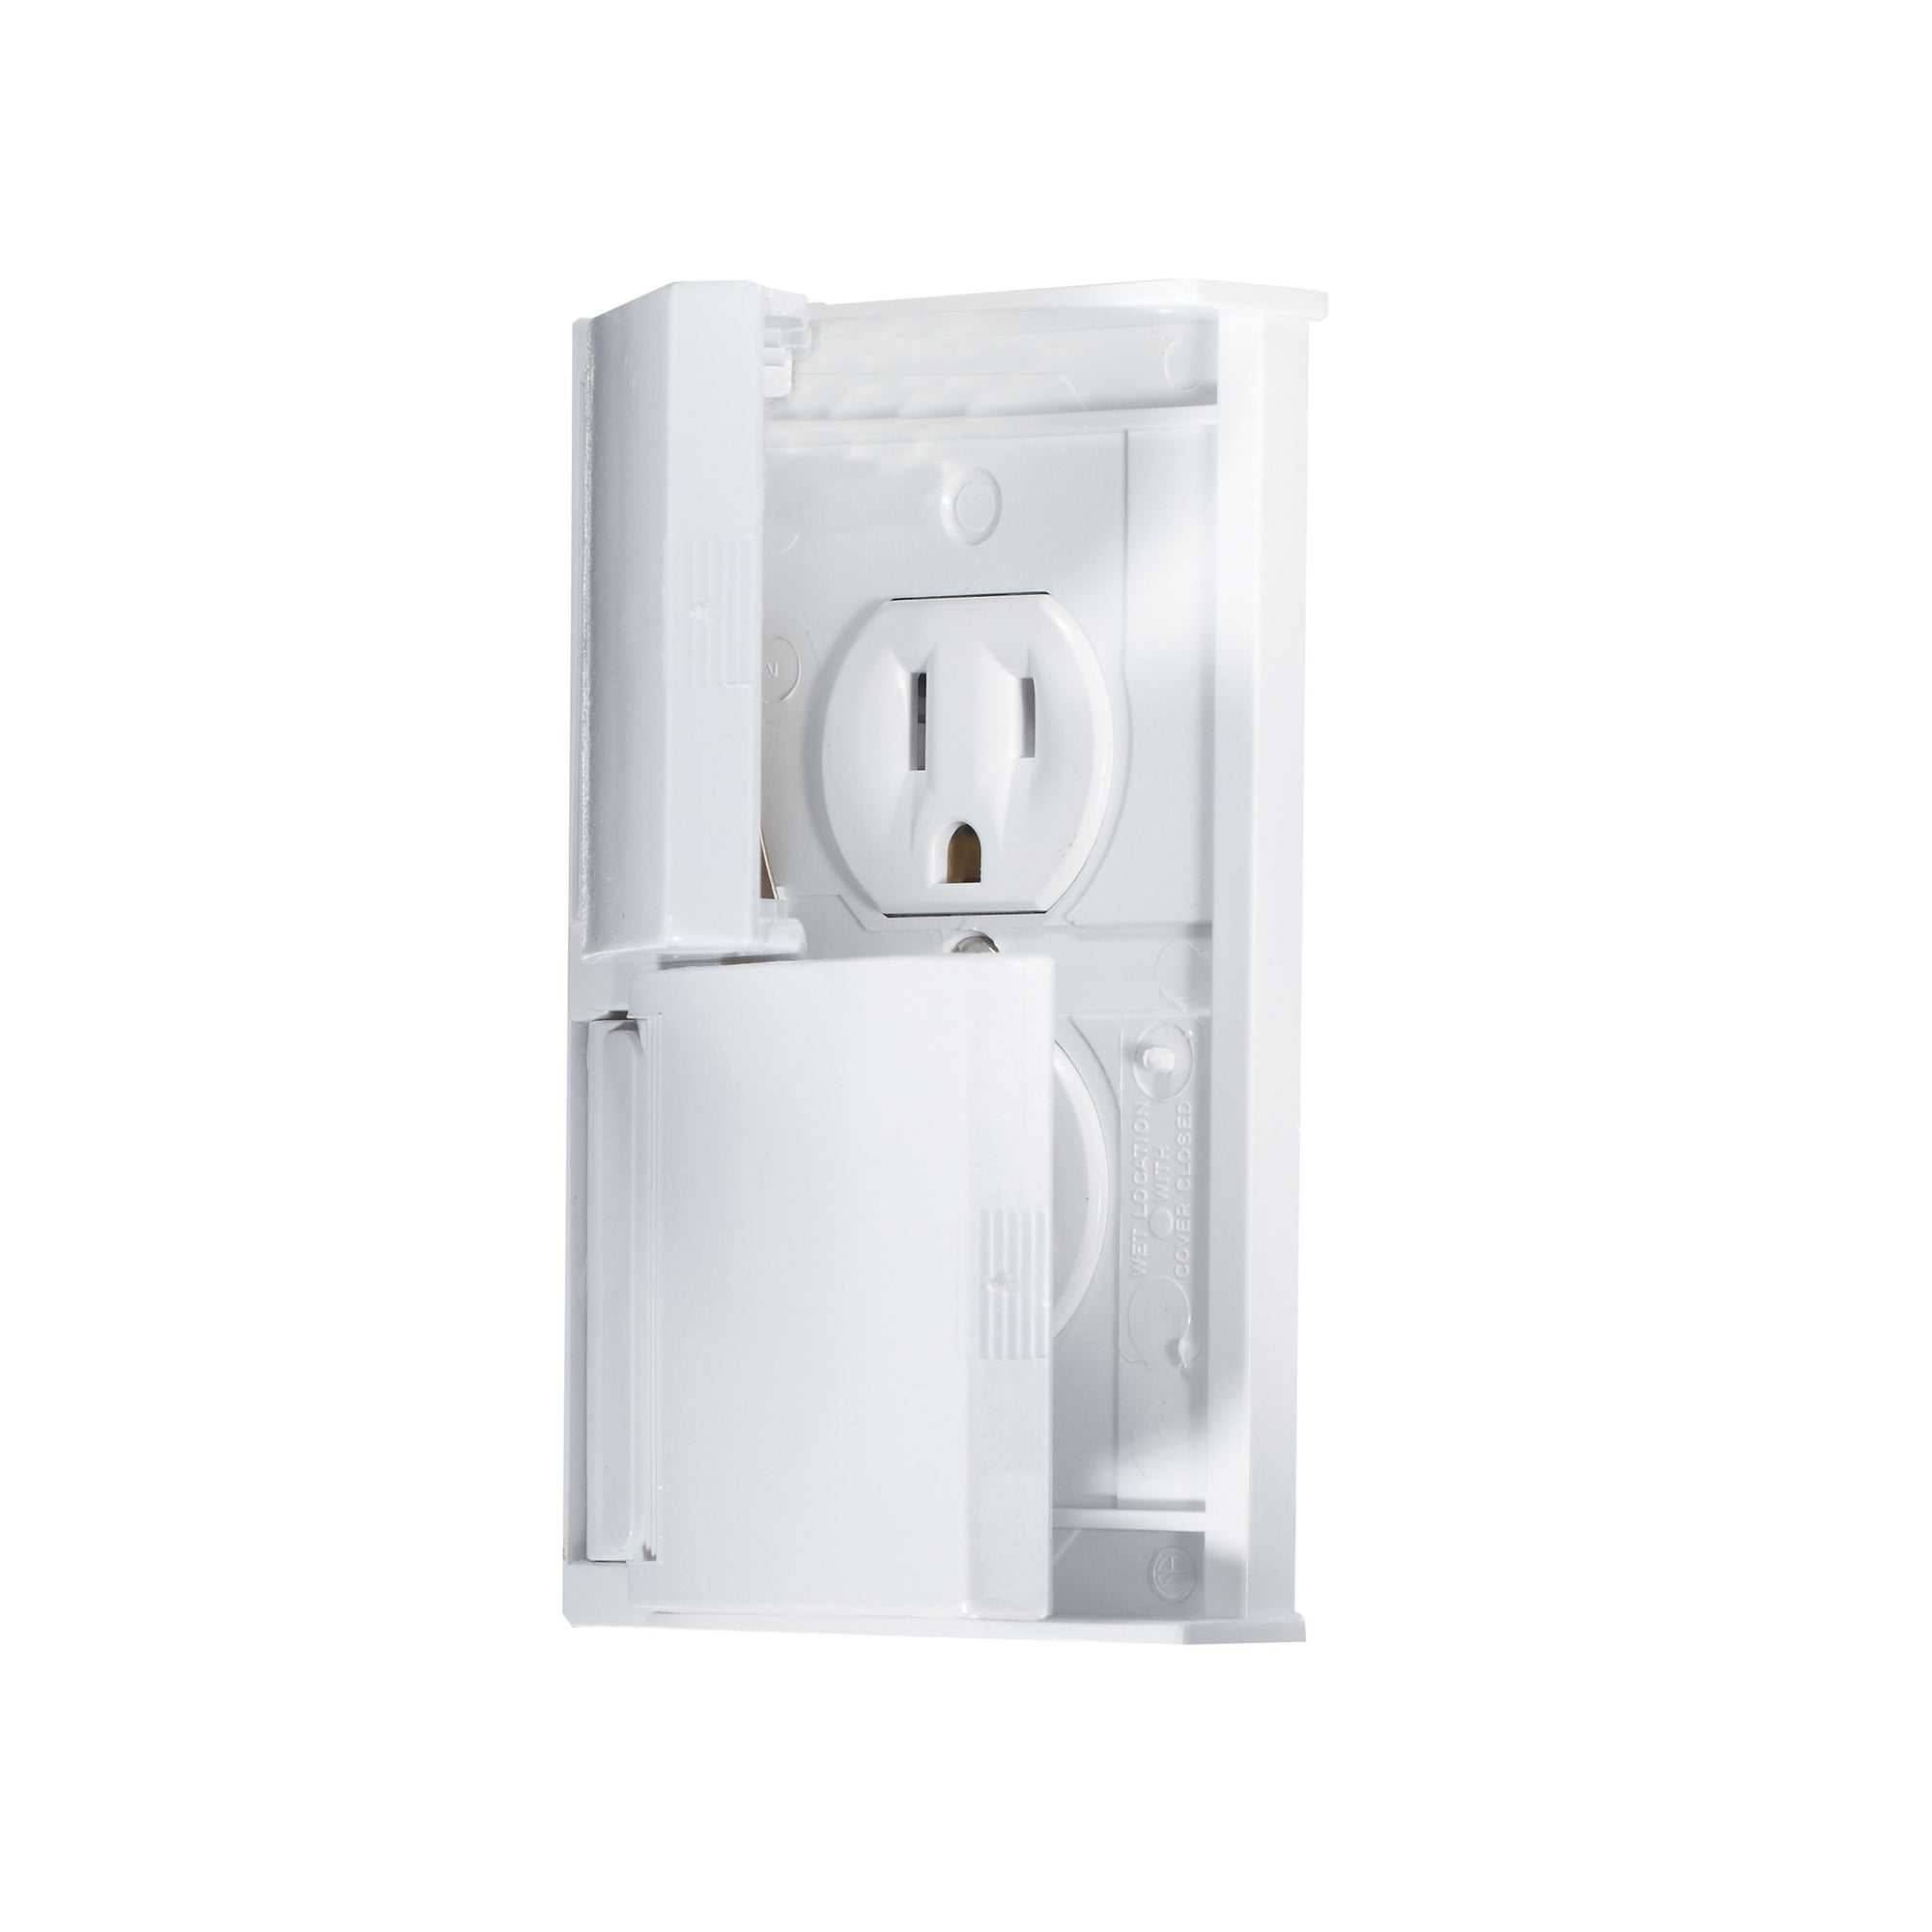 RV Designer S905 AC Weatherproof Dual Outlet With Snap Cover-Plate - White